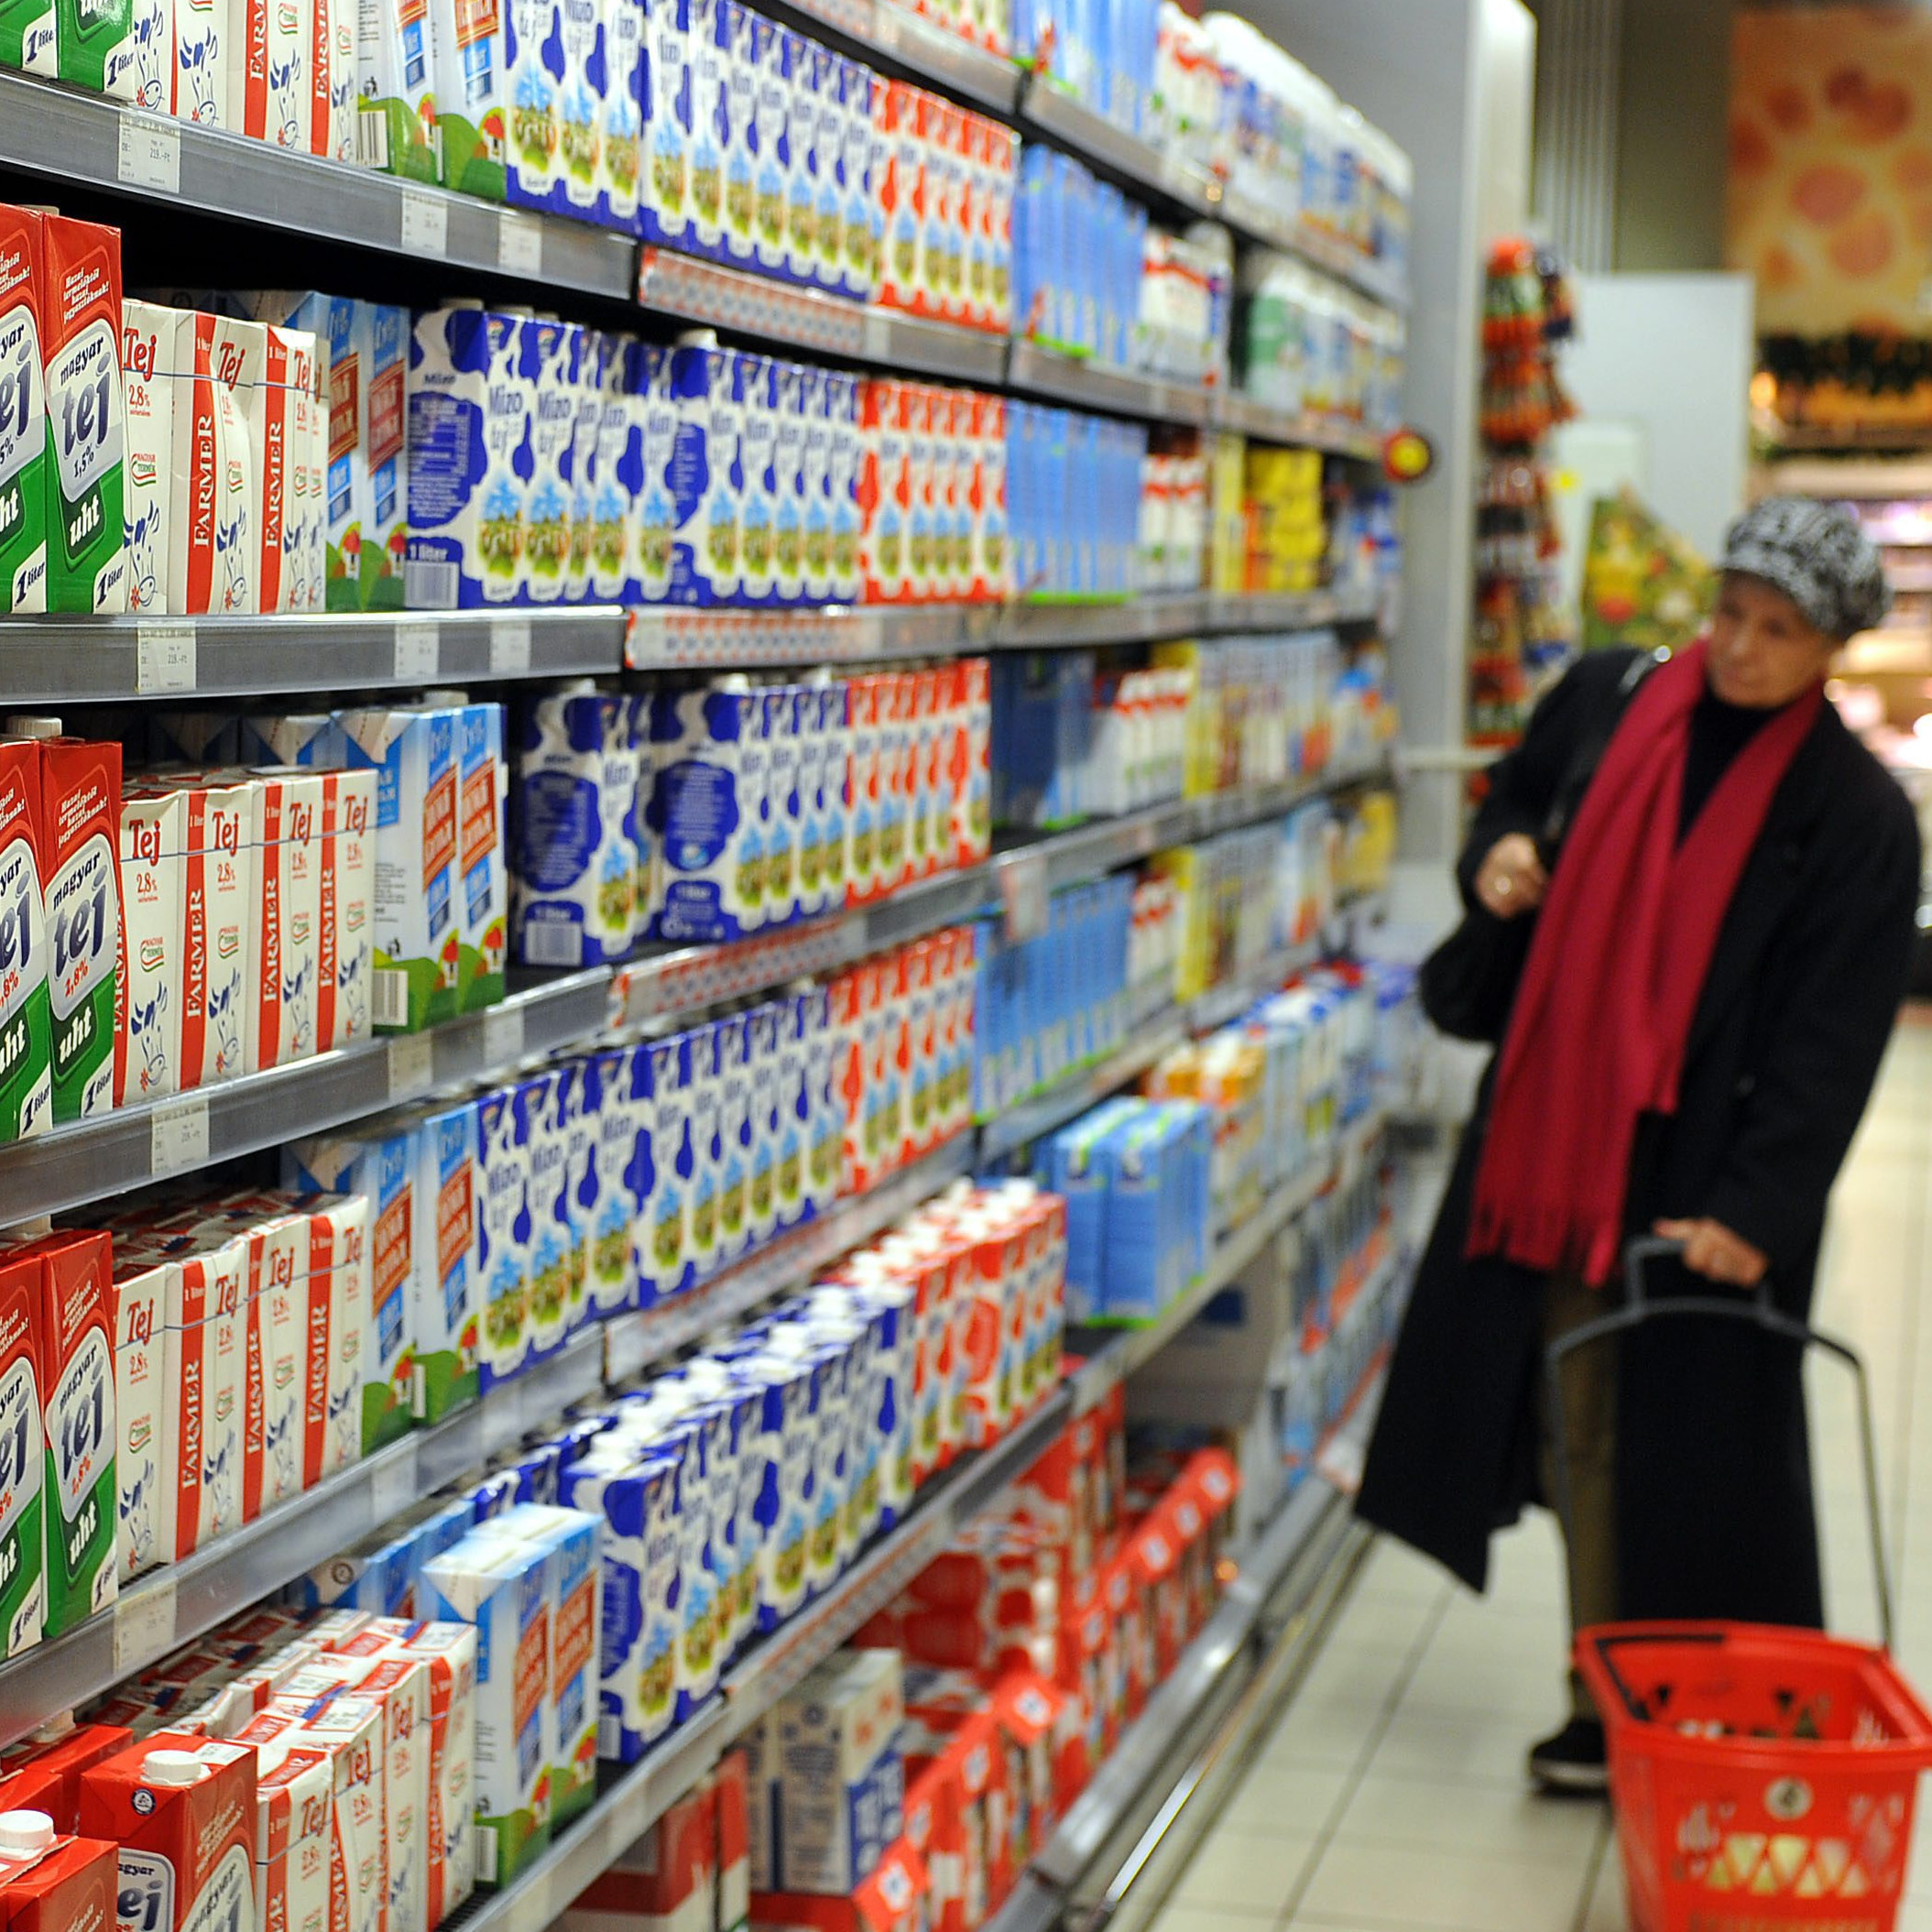 “Price Stop” Comes Into Effect in Hungary, Inspectors Already Enforcing Compliance